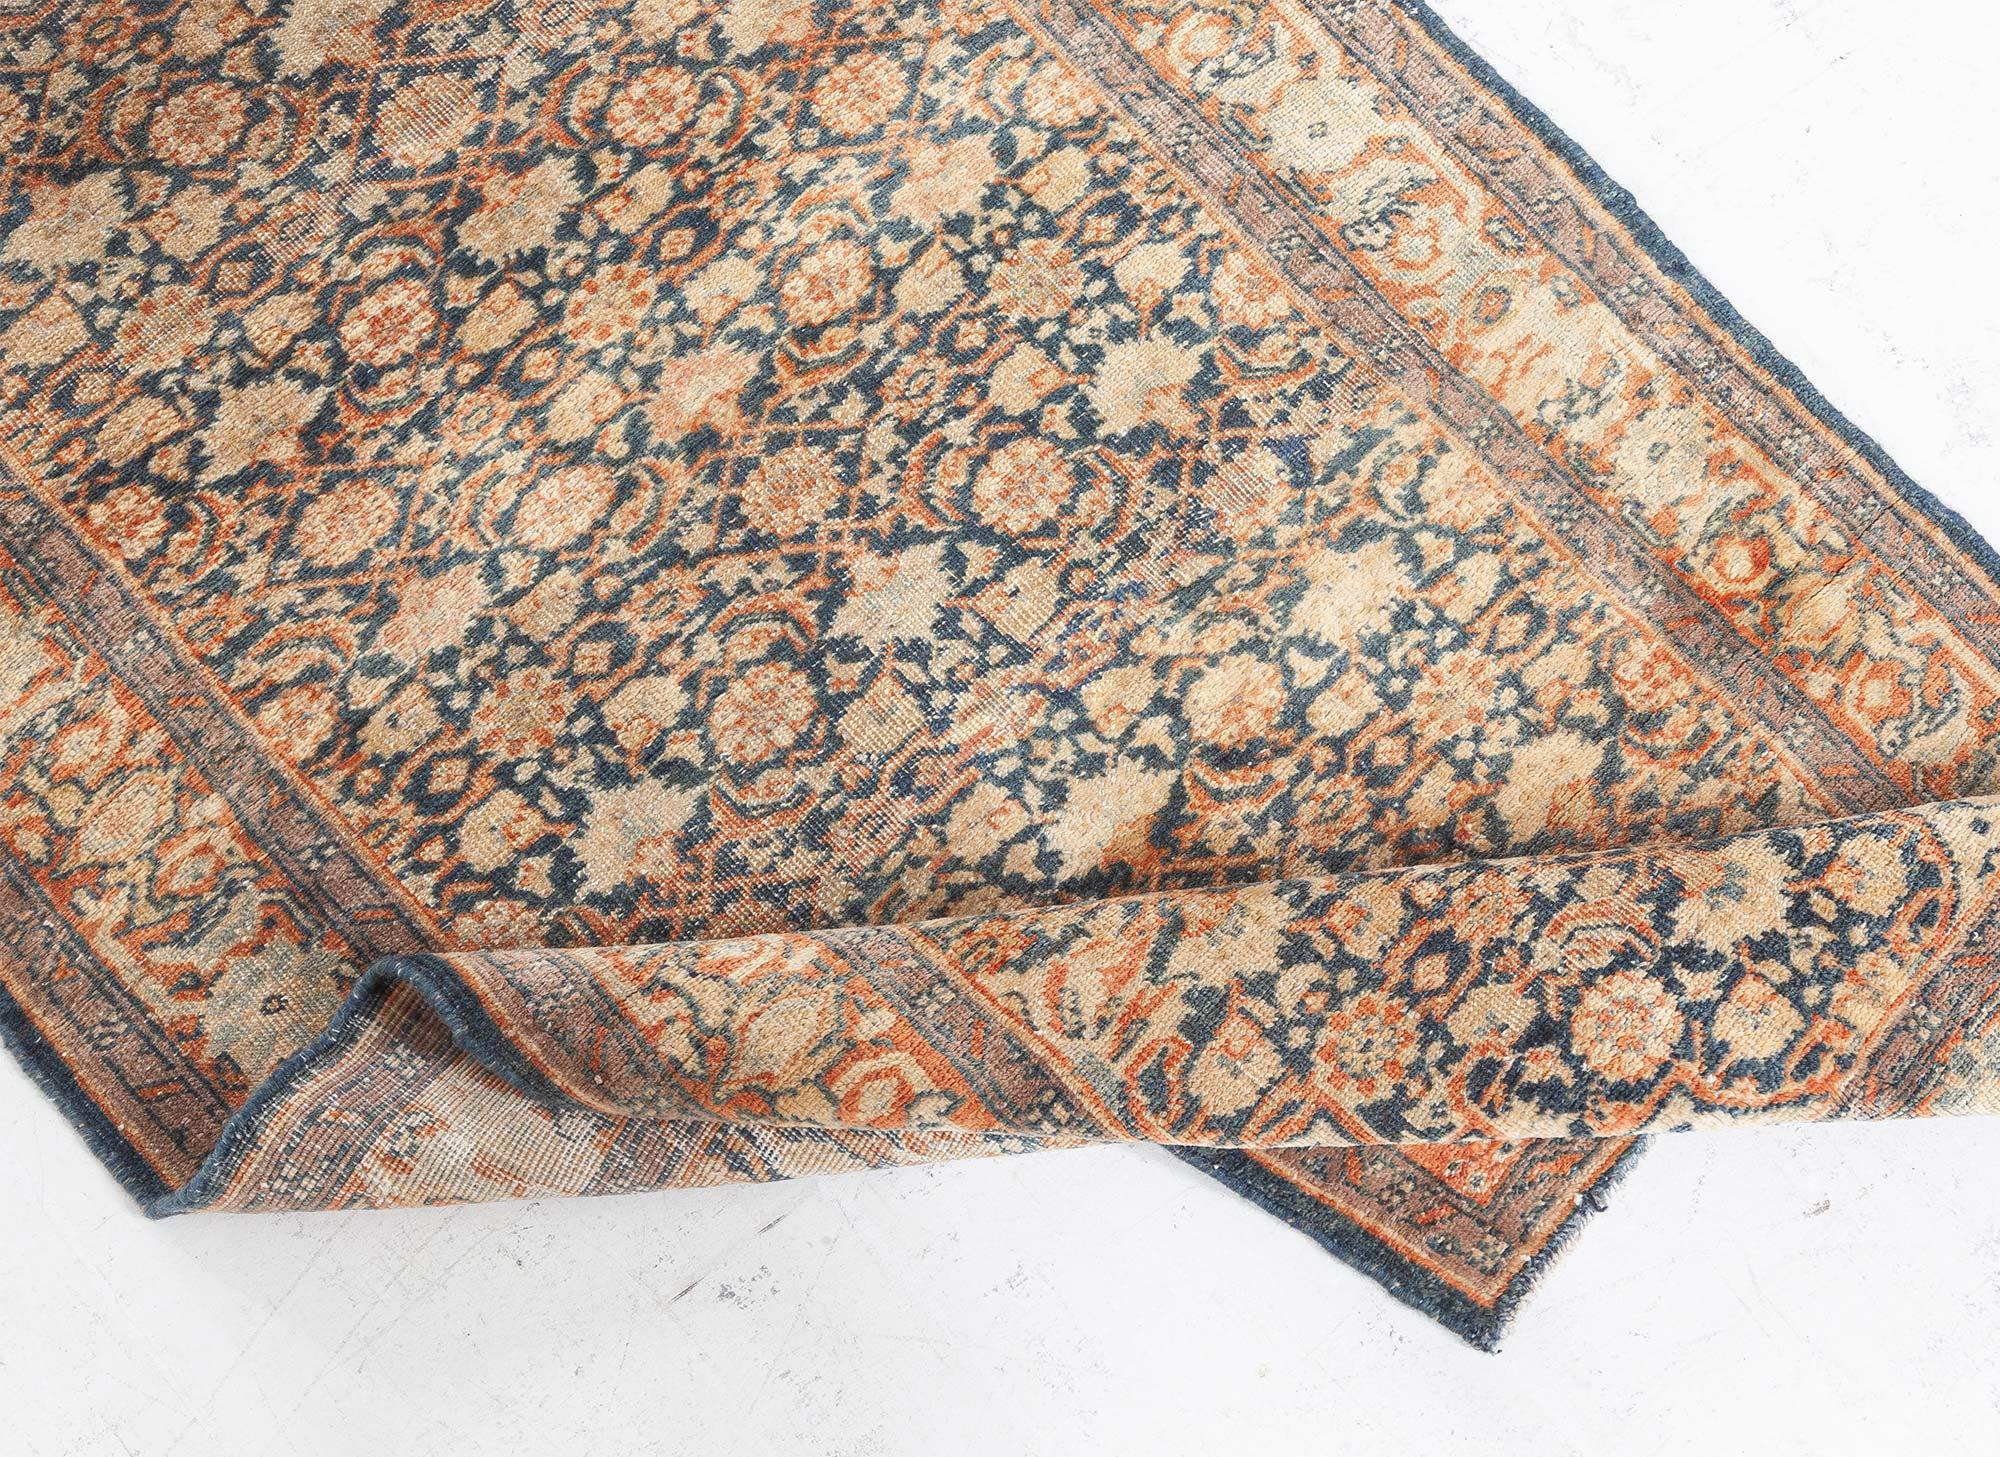  Antique Persian Tabriz Runner In Good Condition For Sale In New York, NY